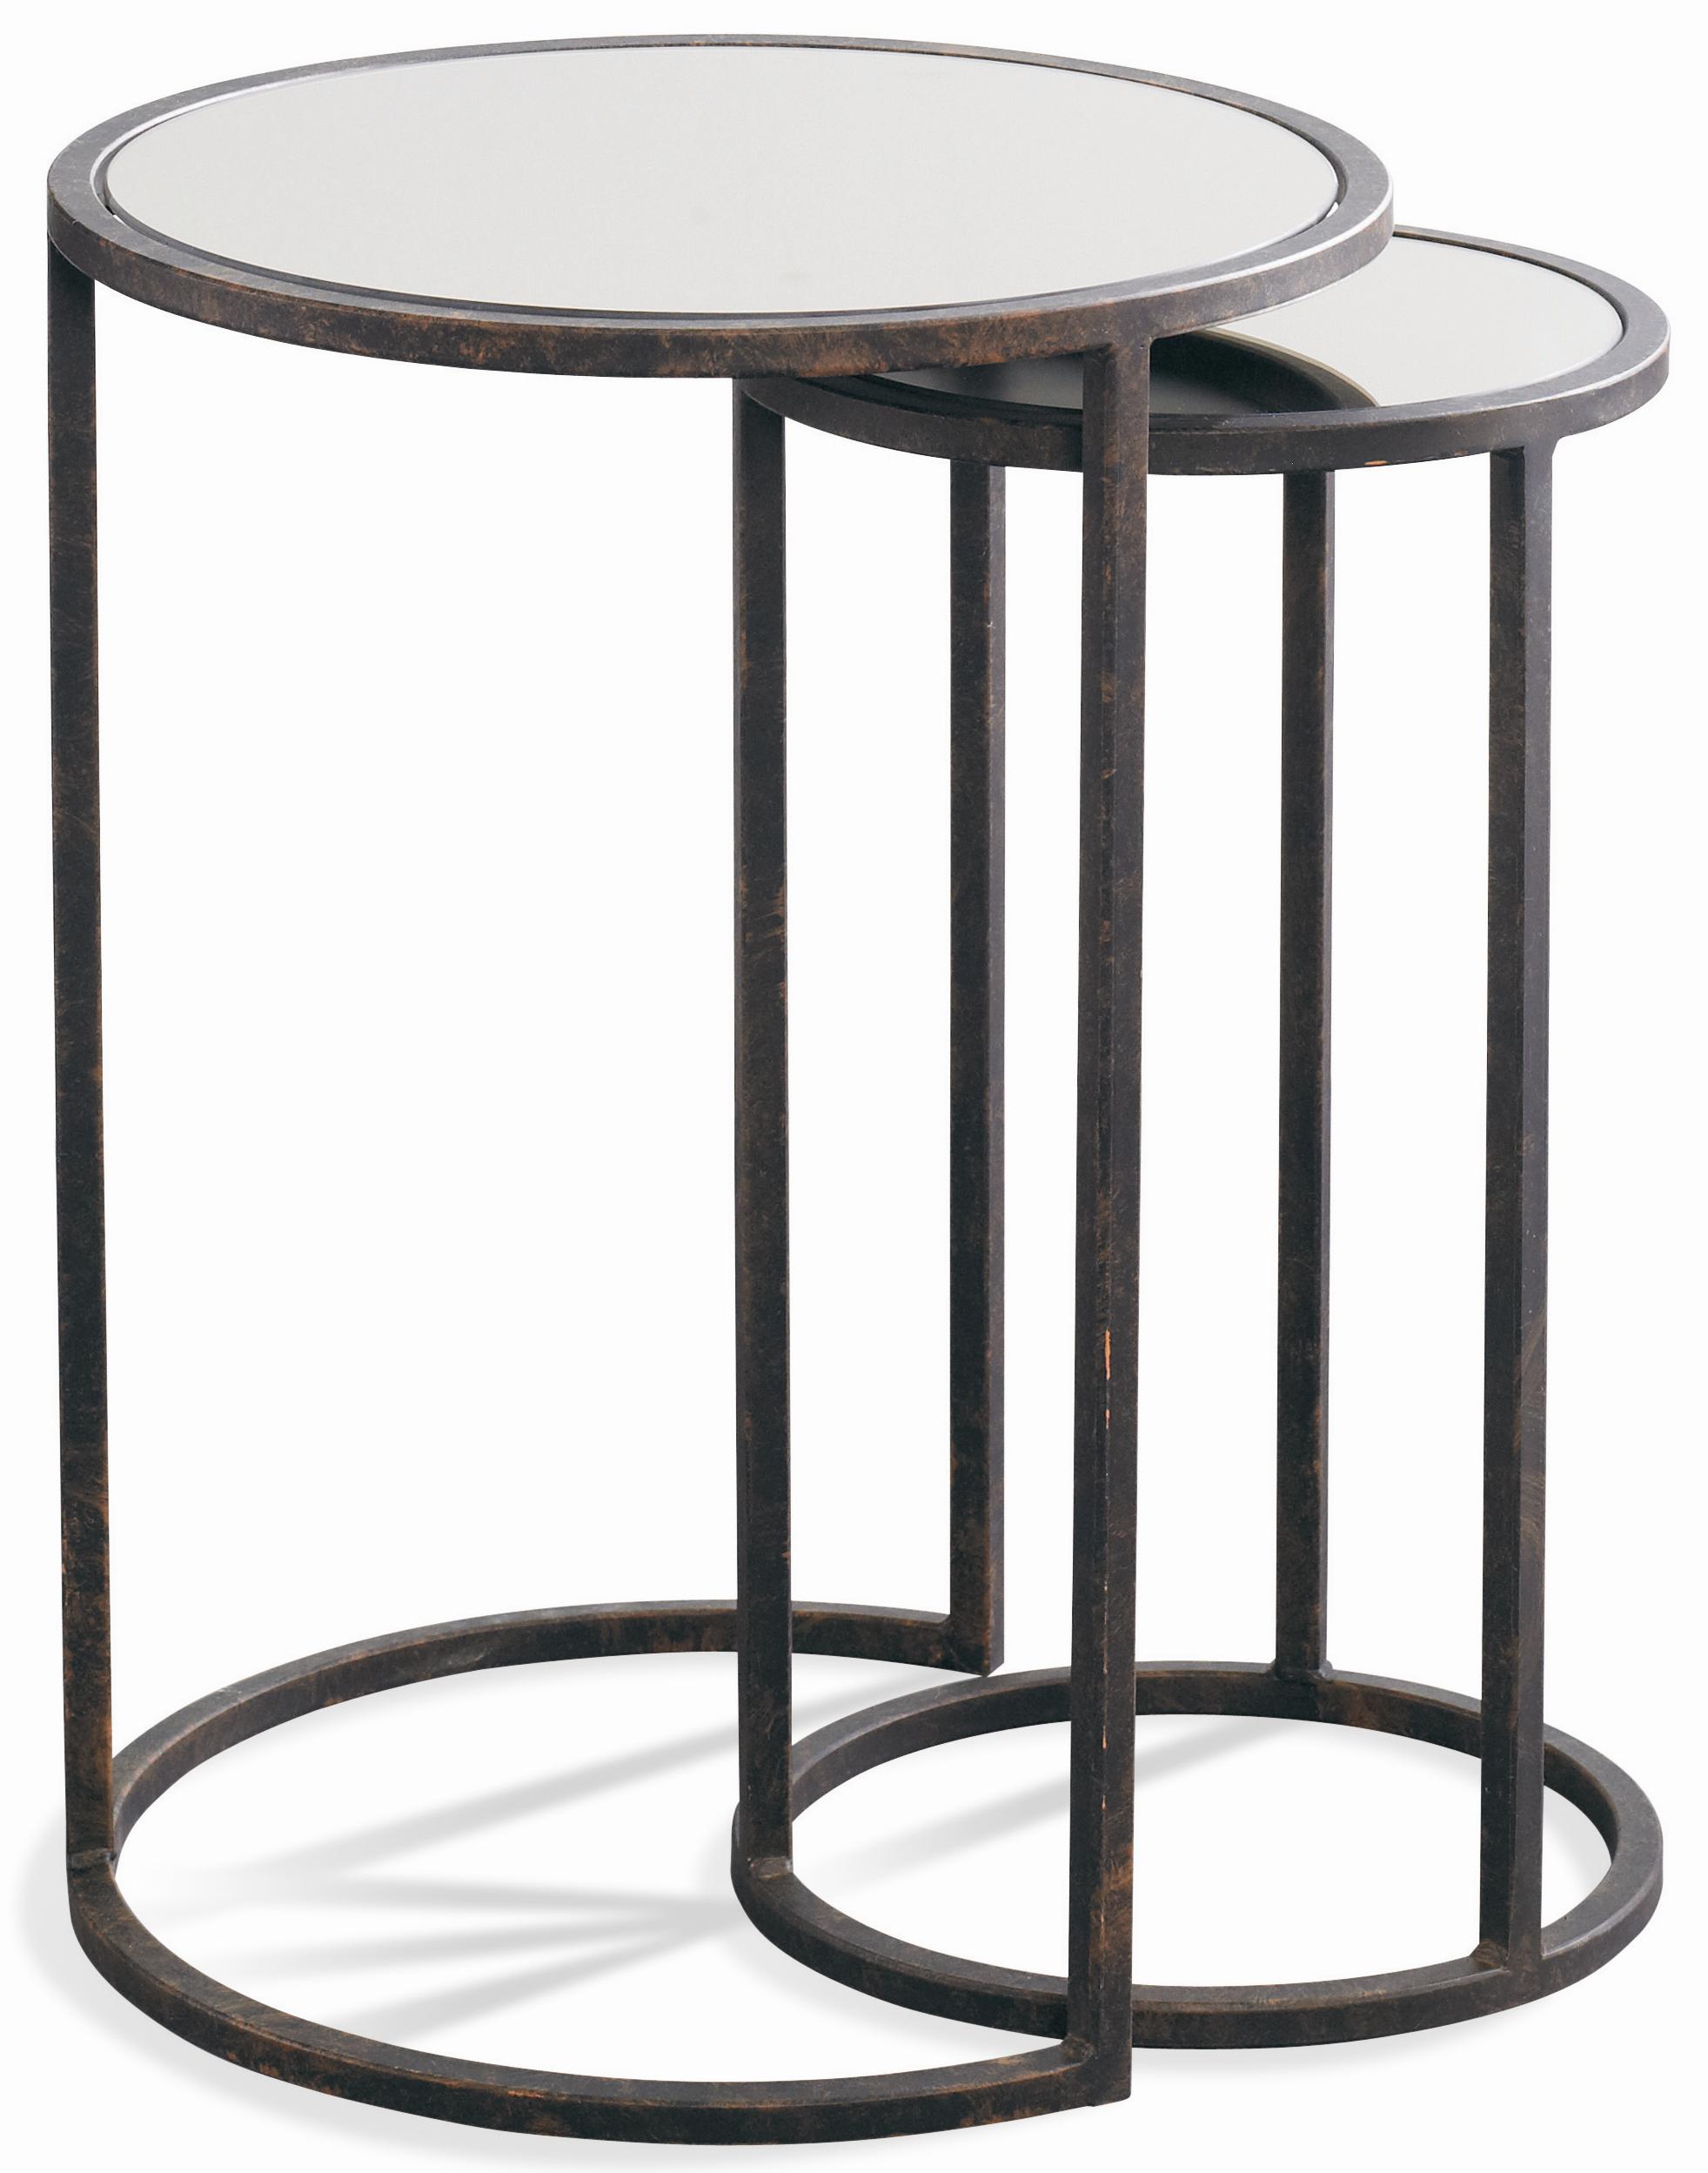 Nest of Aged Iron and Bronze Mirrored Glass Tables